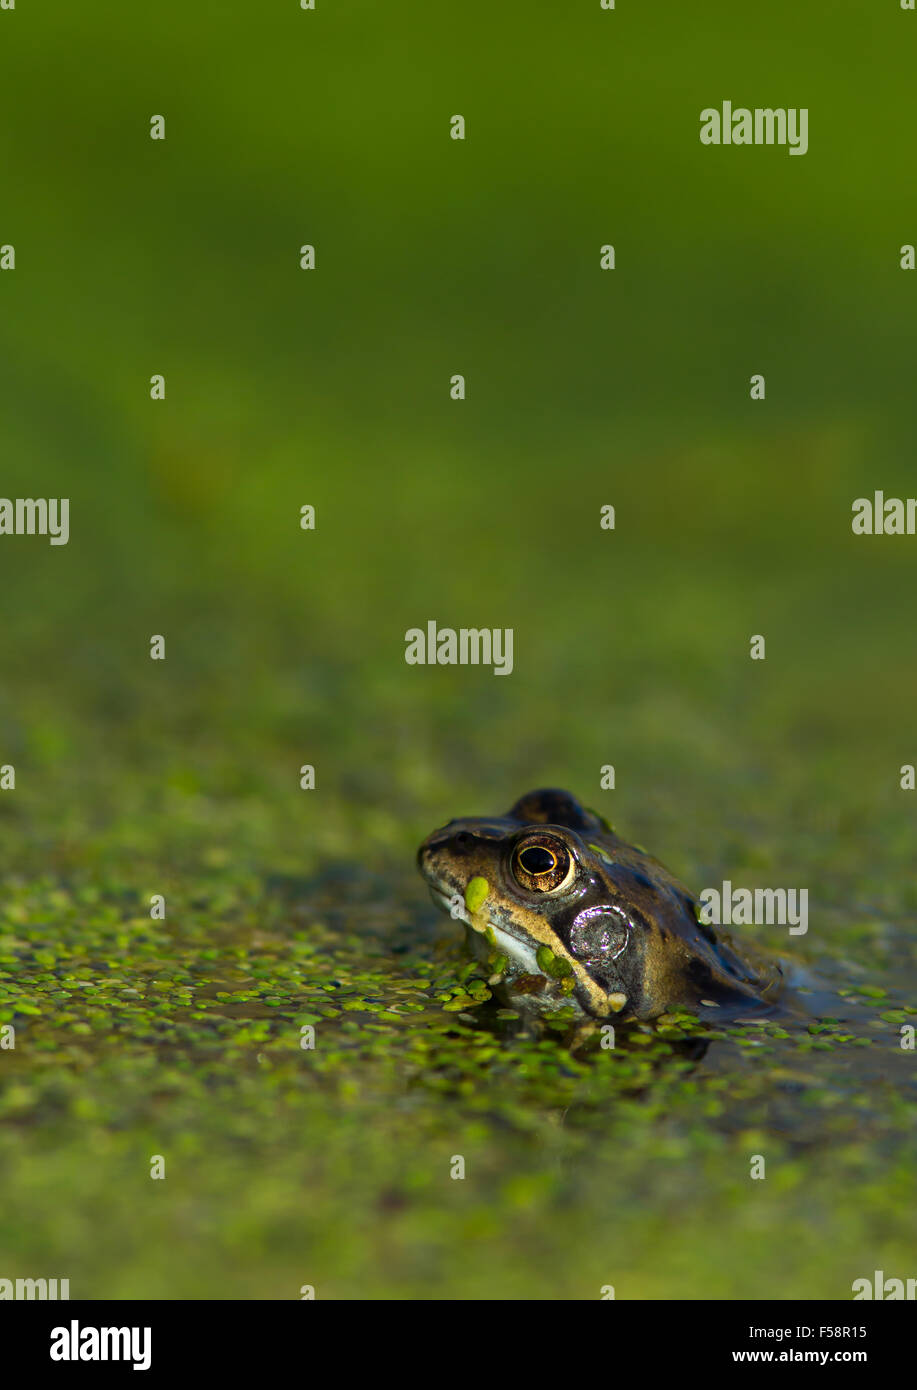 A frog in springtime emerging from hibernation through a pond covered in floating weed Stock Photo